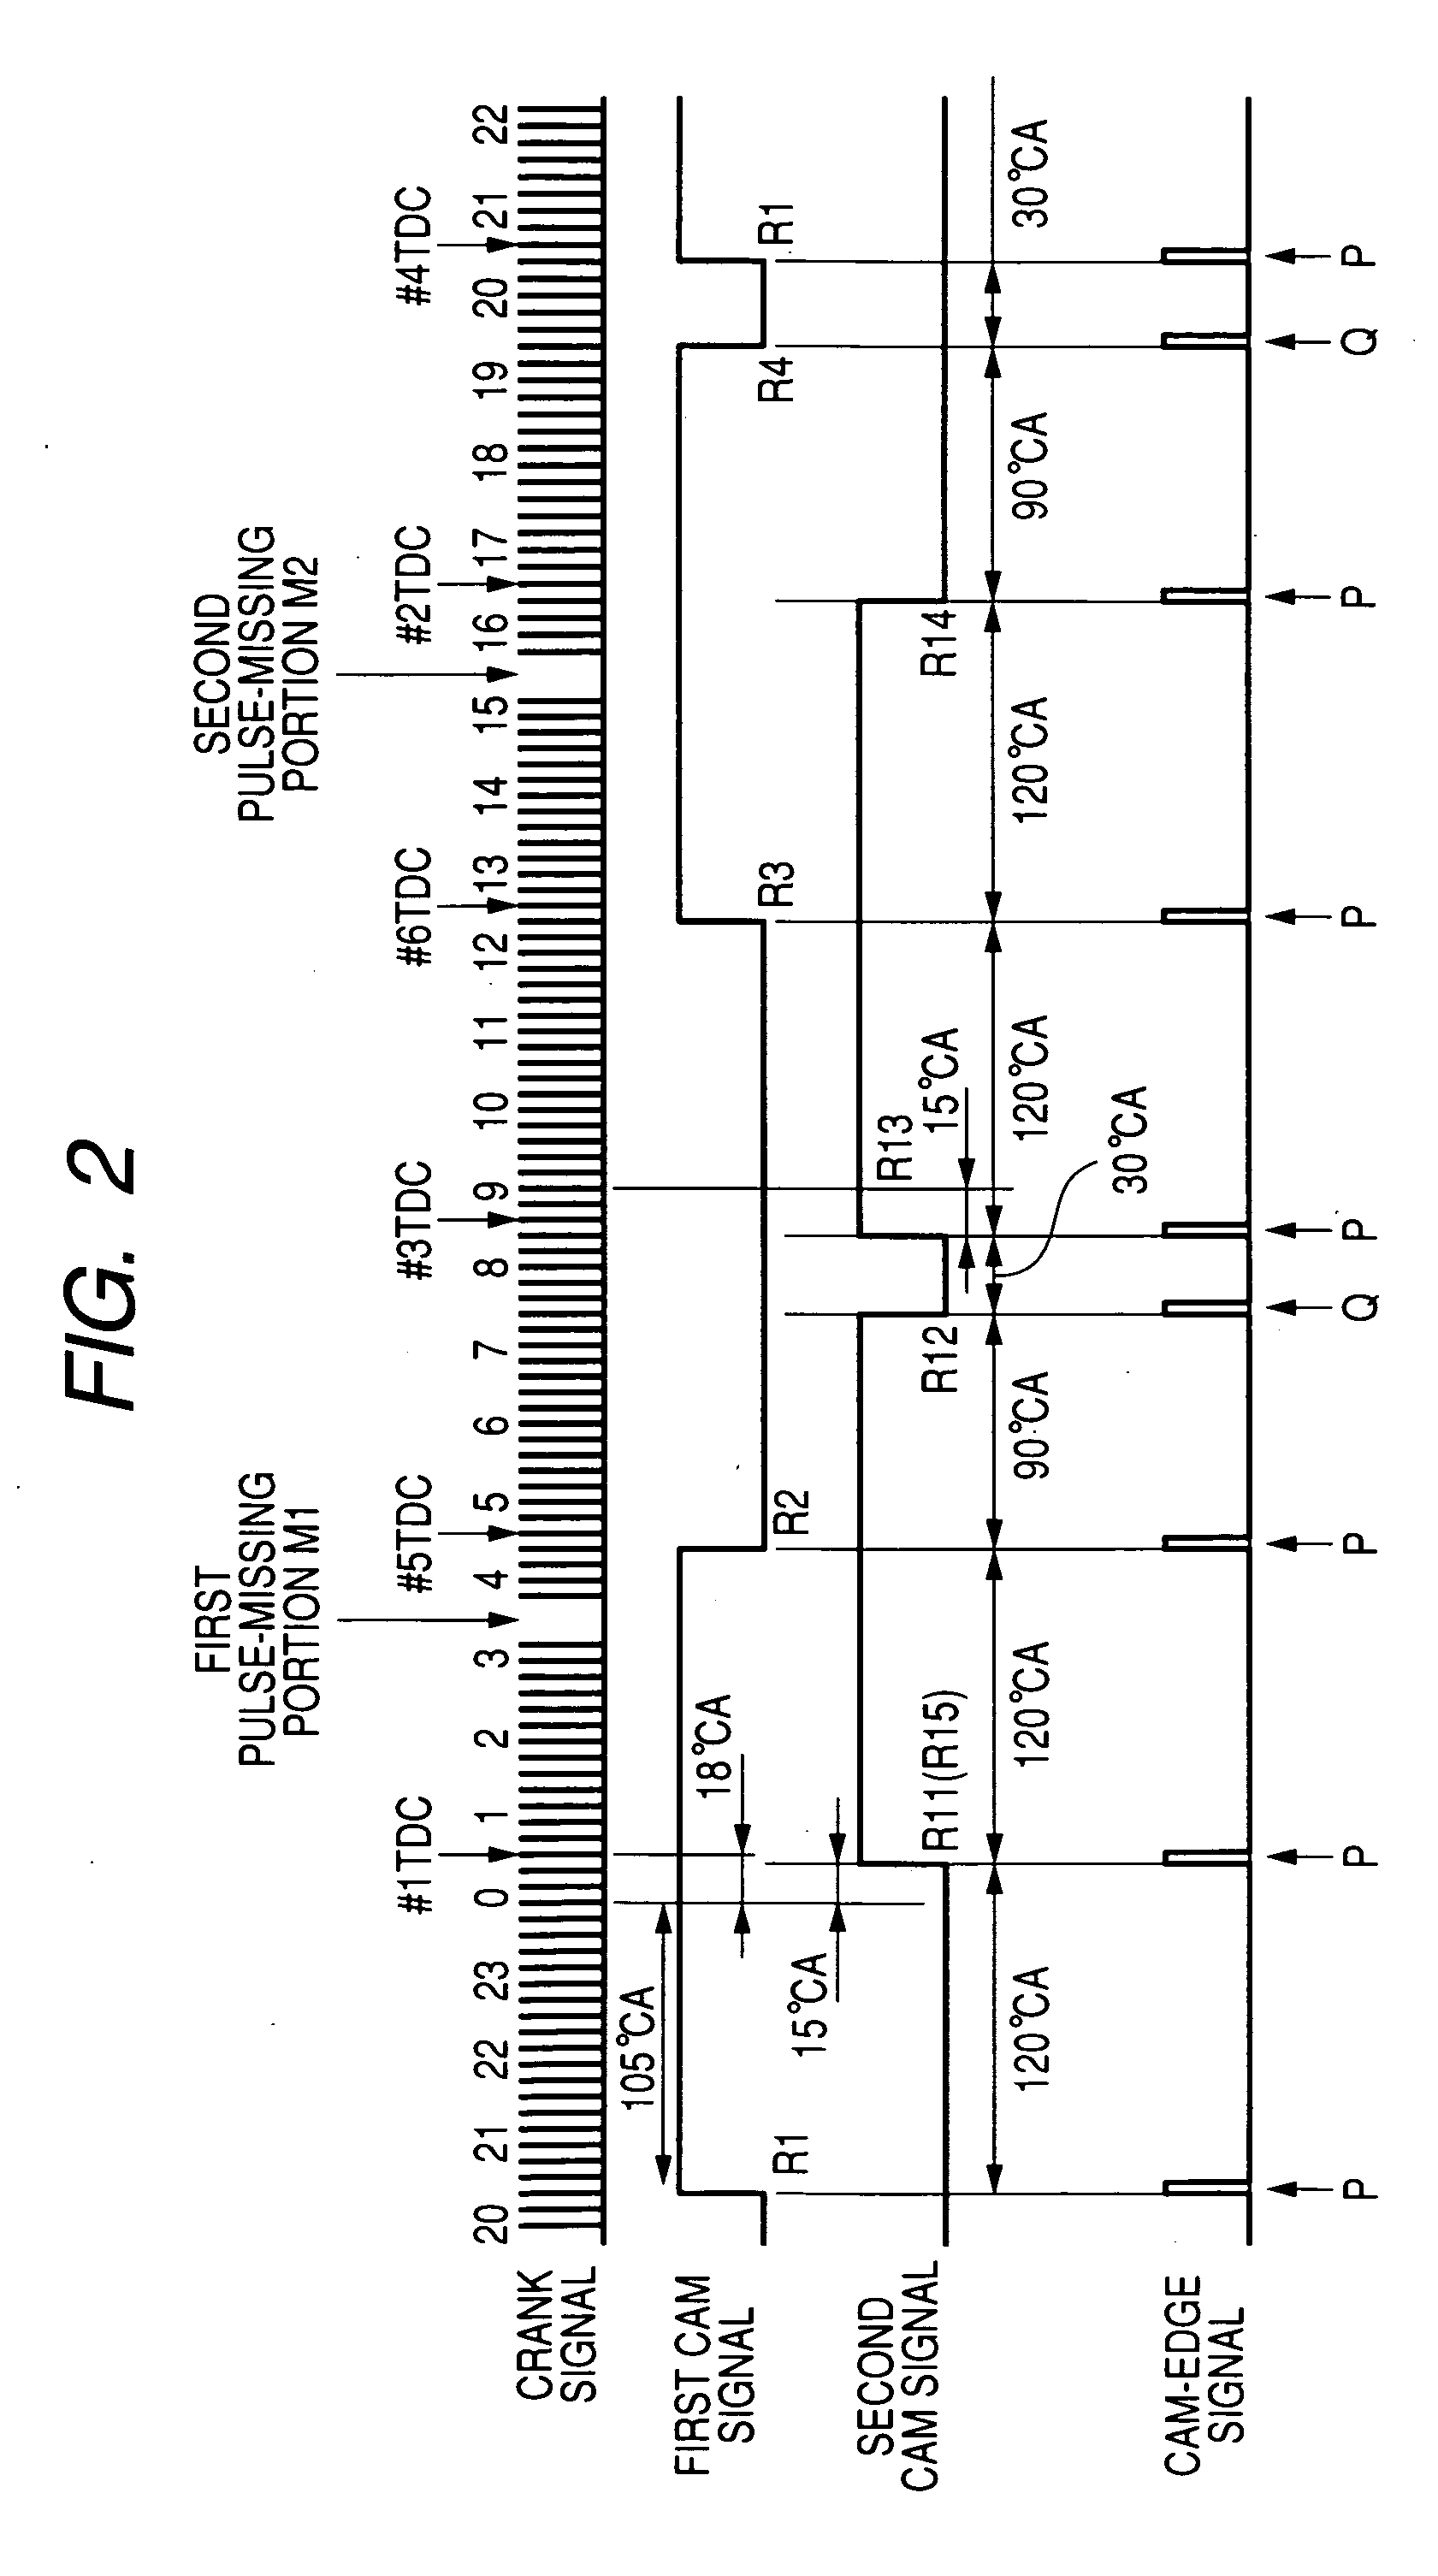 Engine control apparatus using signal with level changing with engine operation